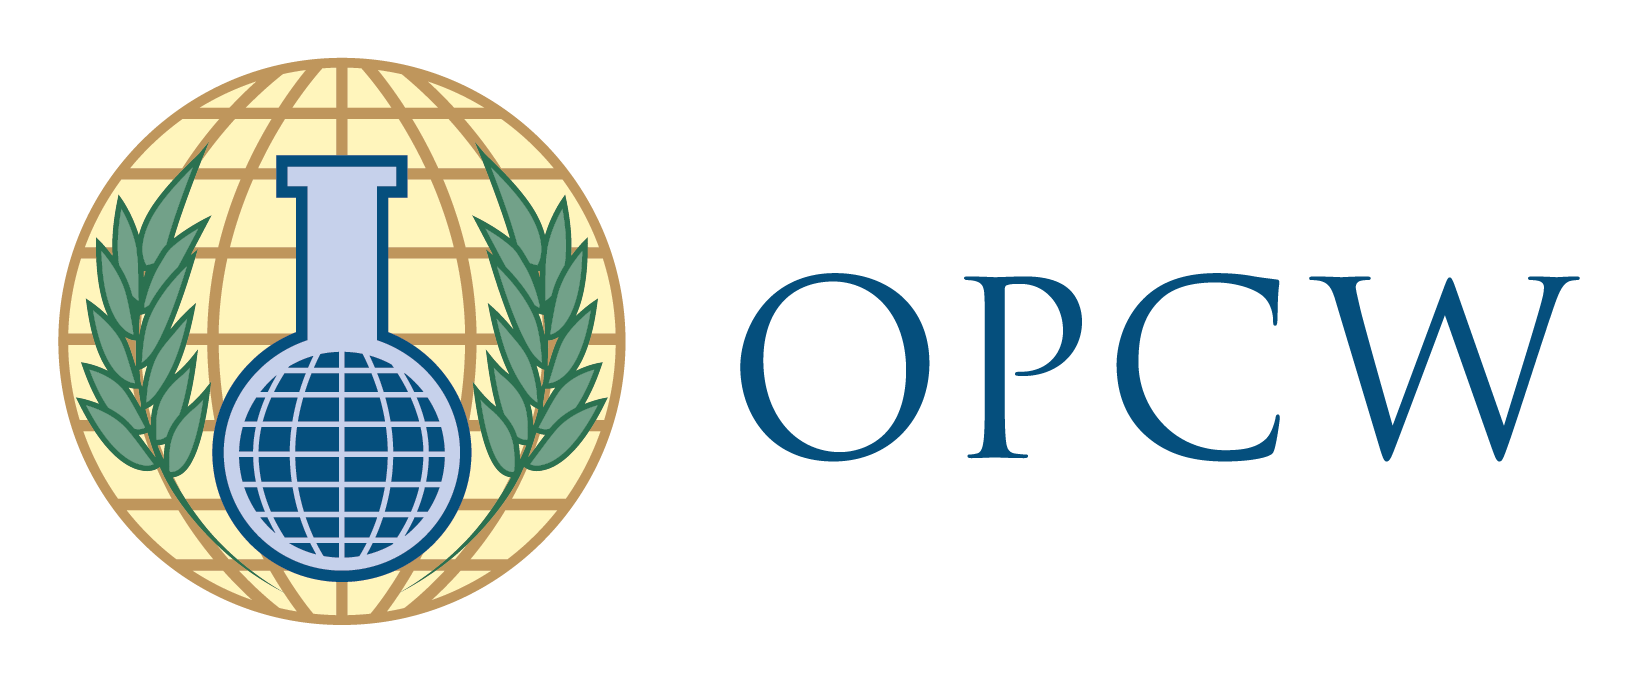 Organisation for the Prohibition of Chemical Weapons (OPCW) EECentre